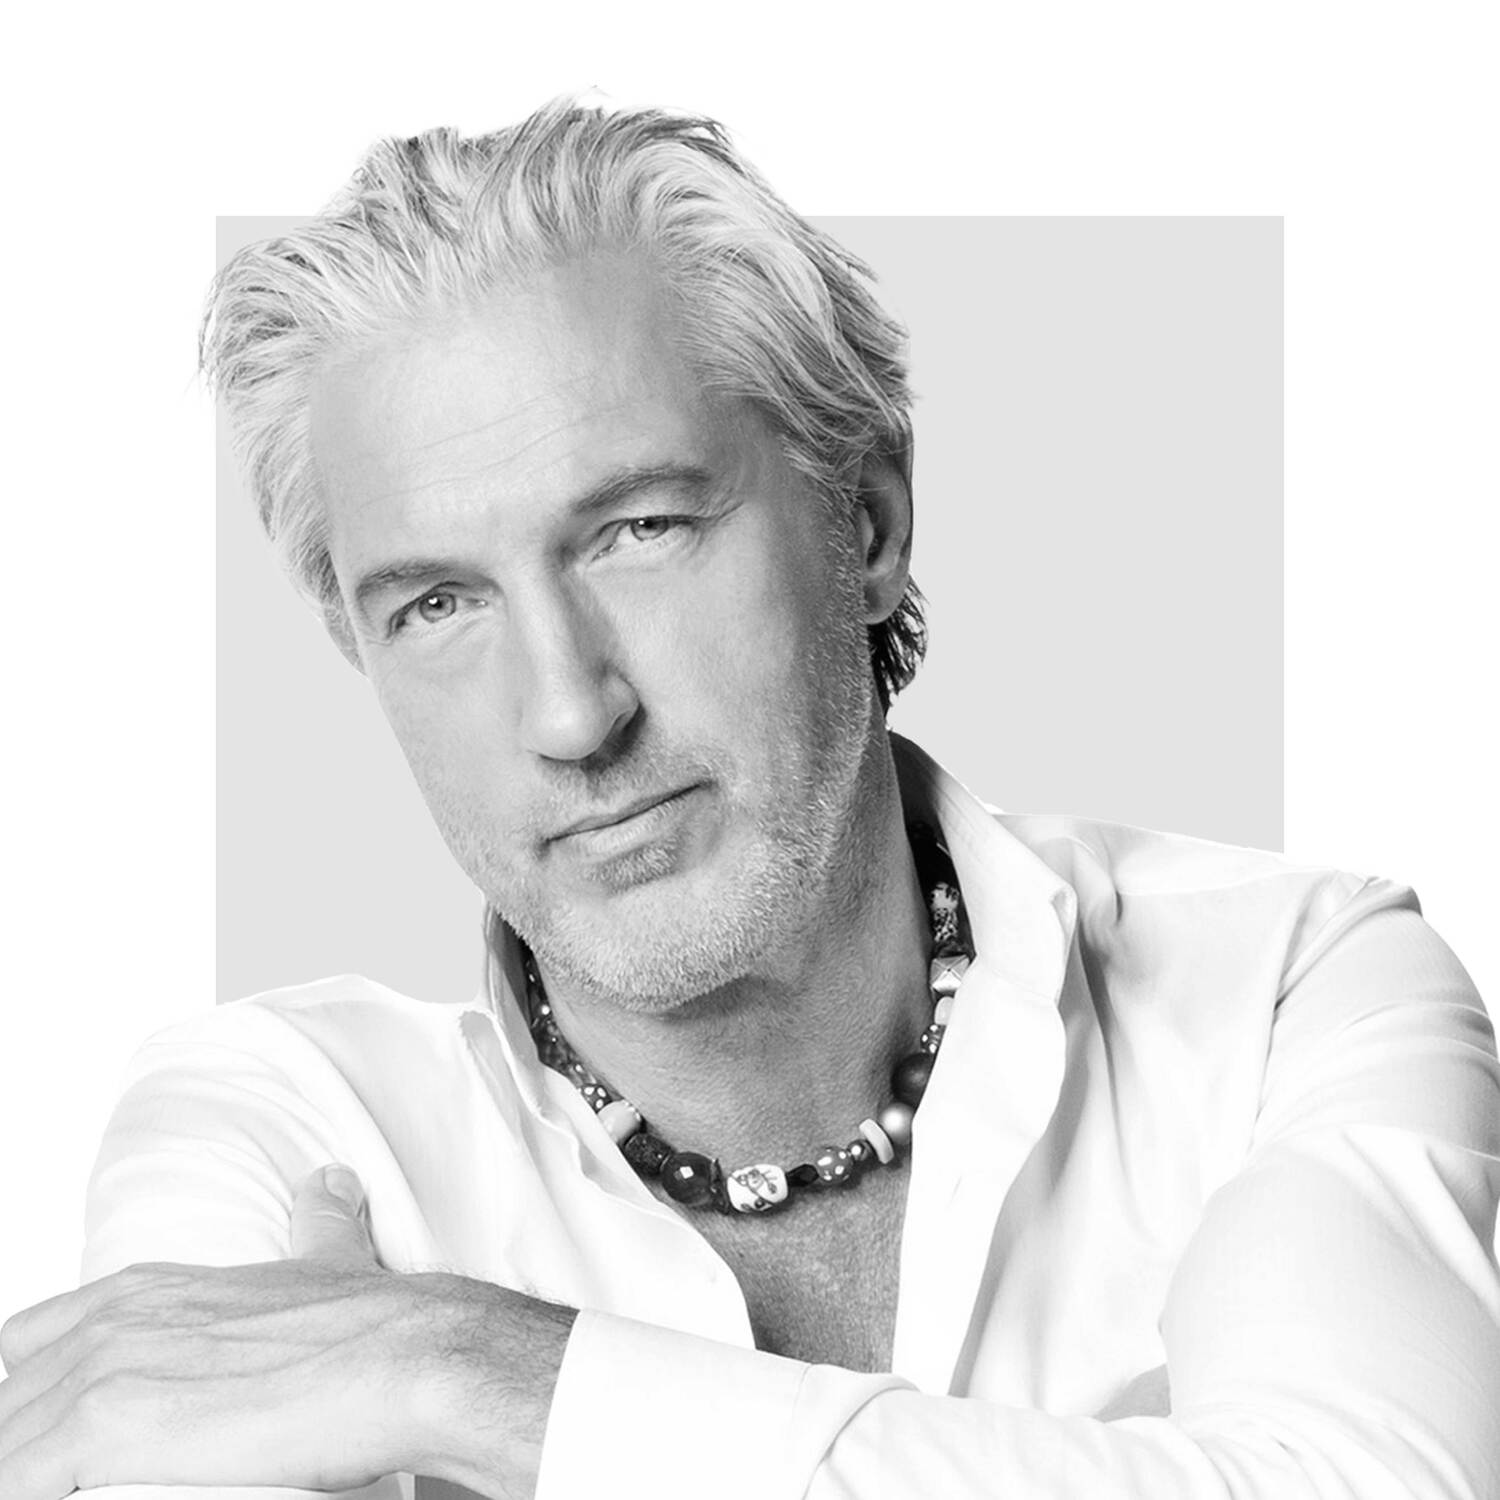 Video: Marcel Wanders on his Knotted Chair